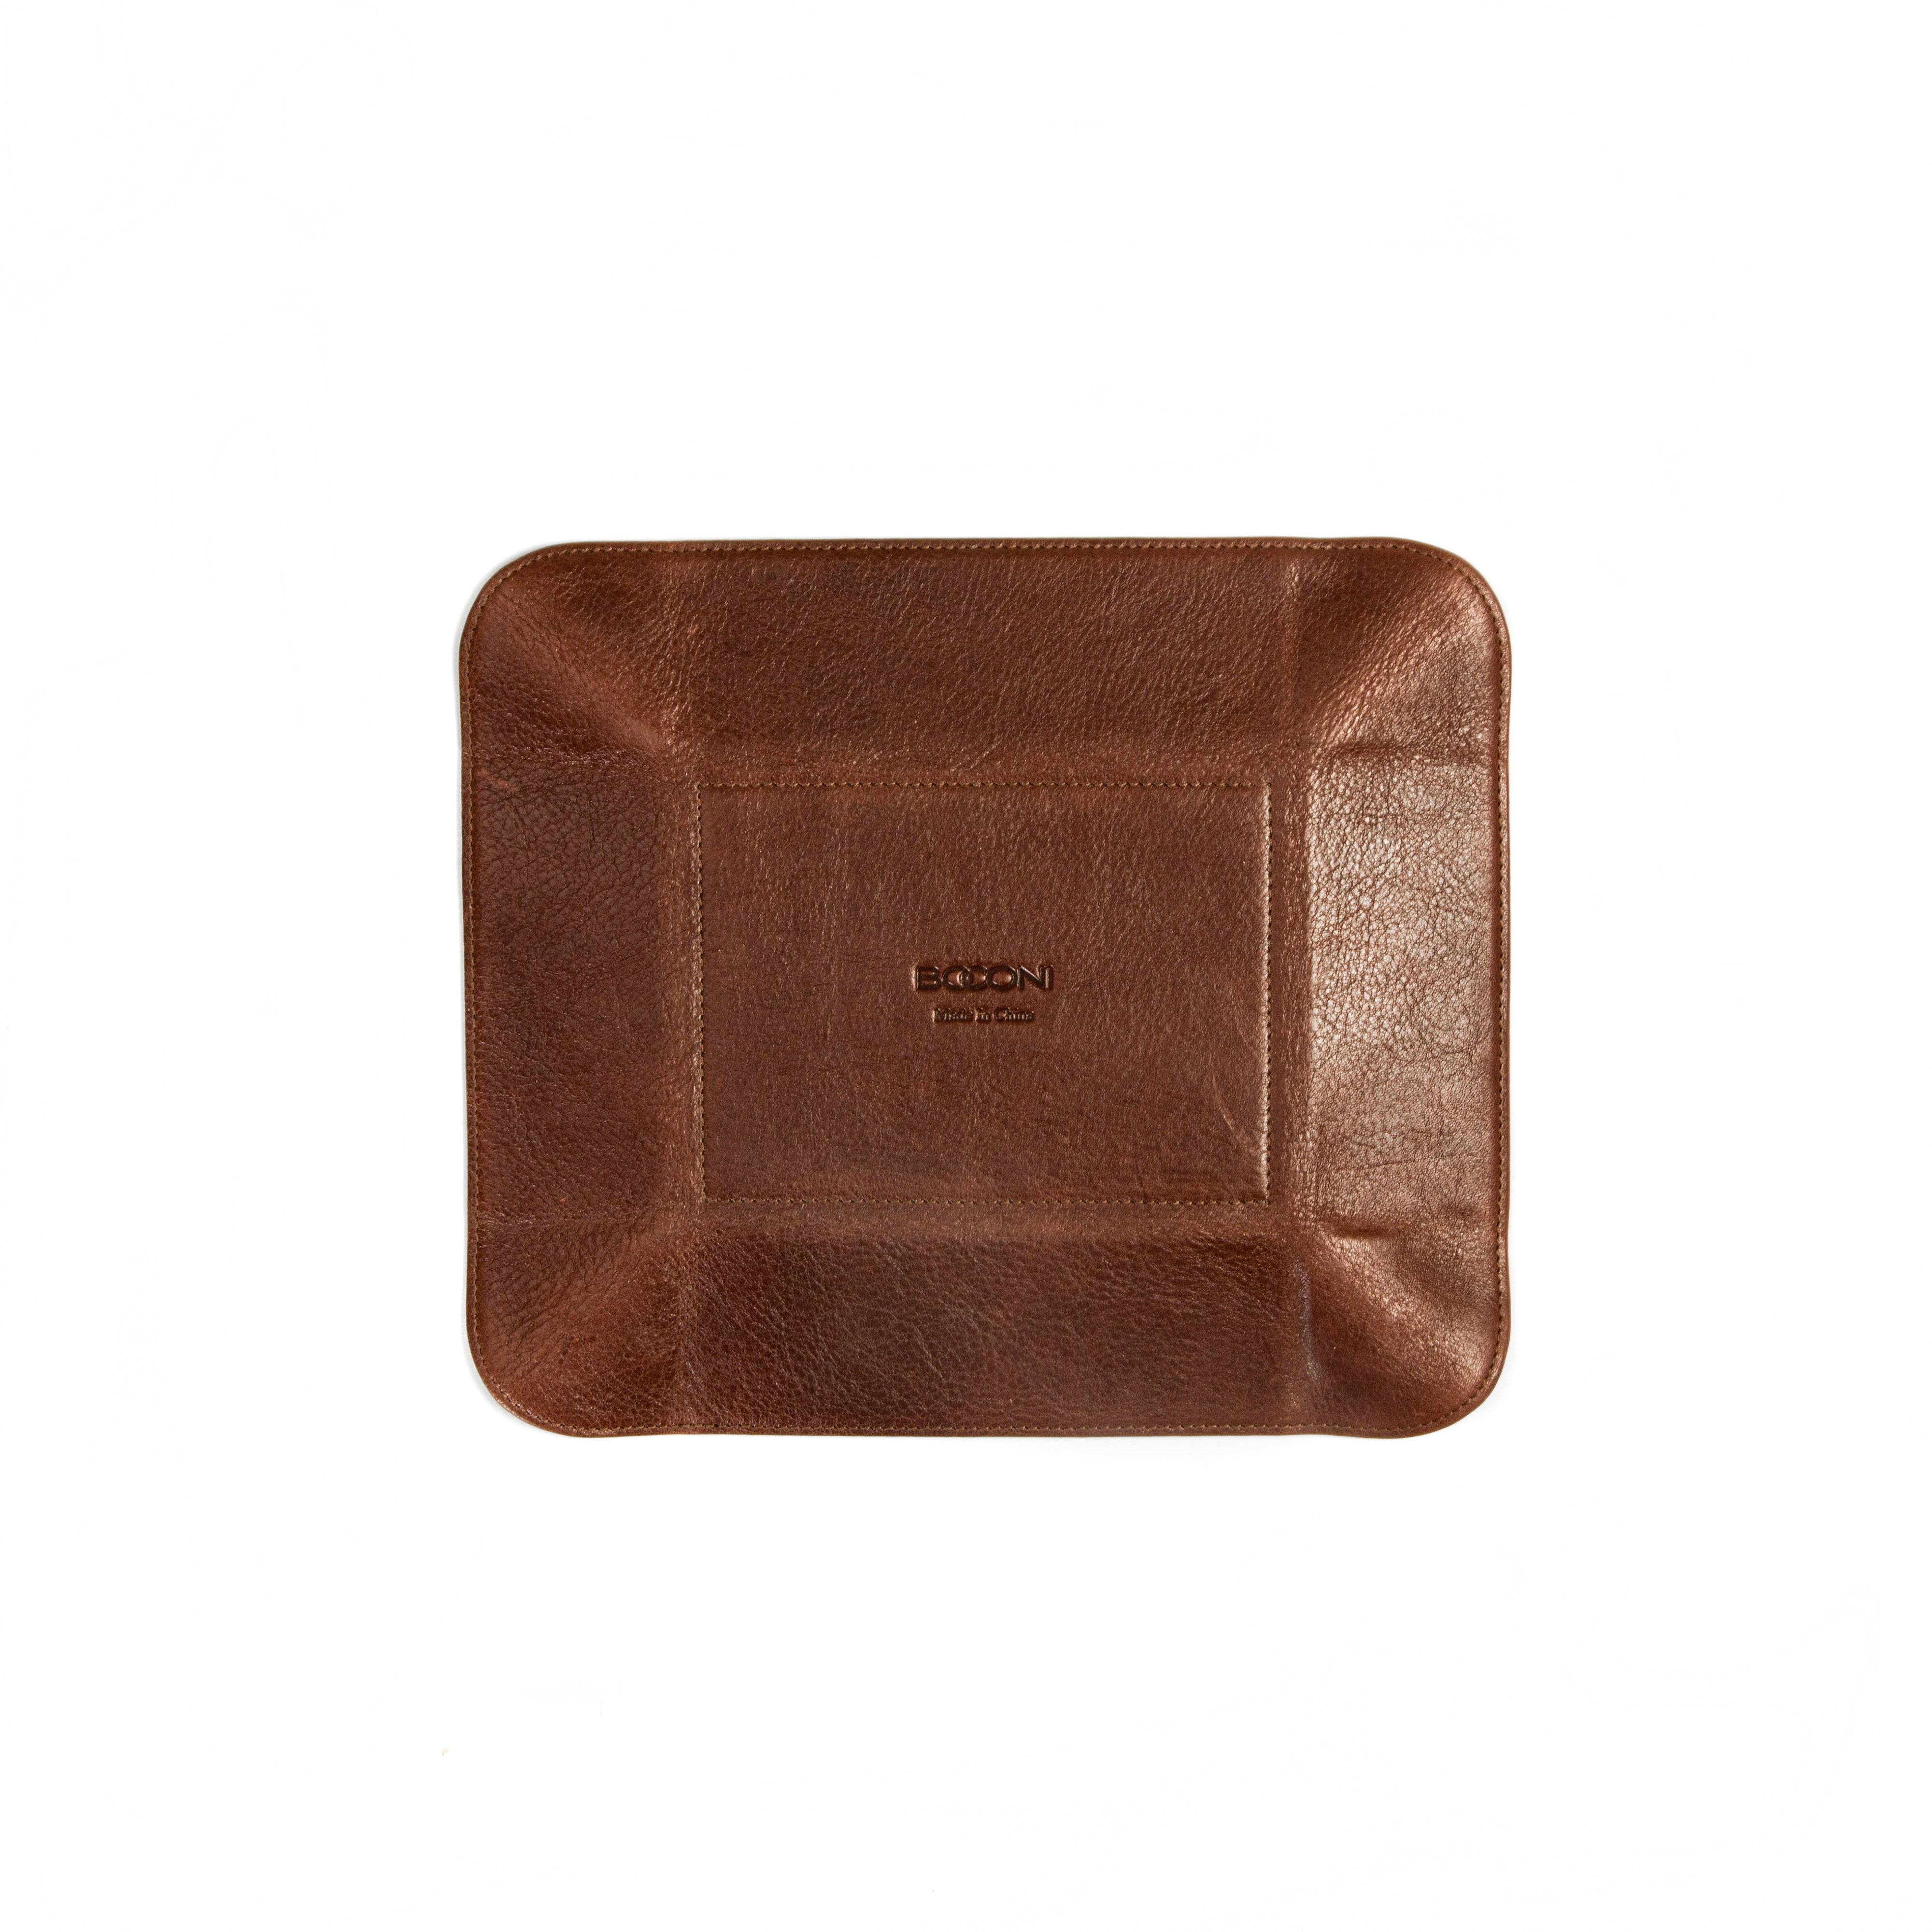 Becker Packable Leather Tray, Bottom View